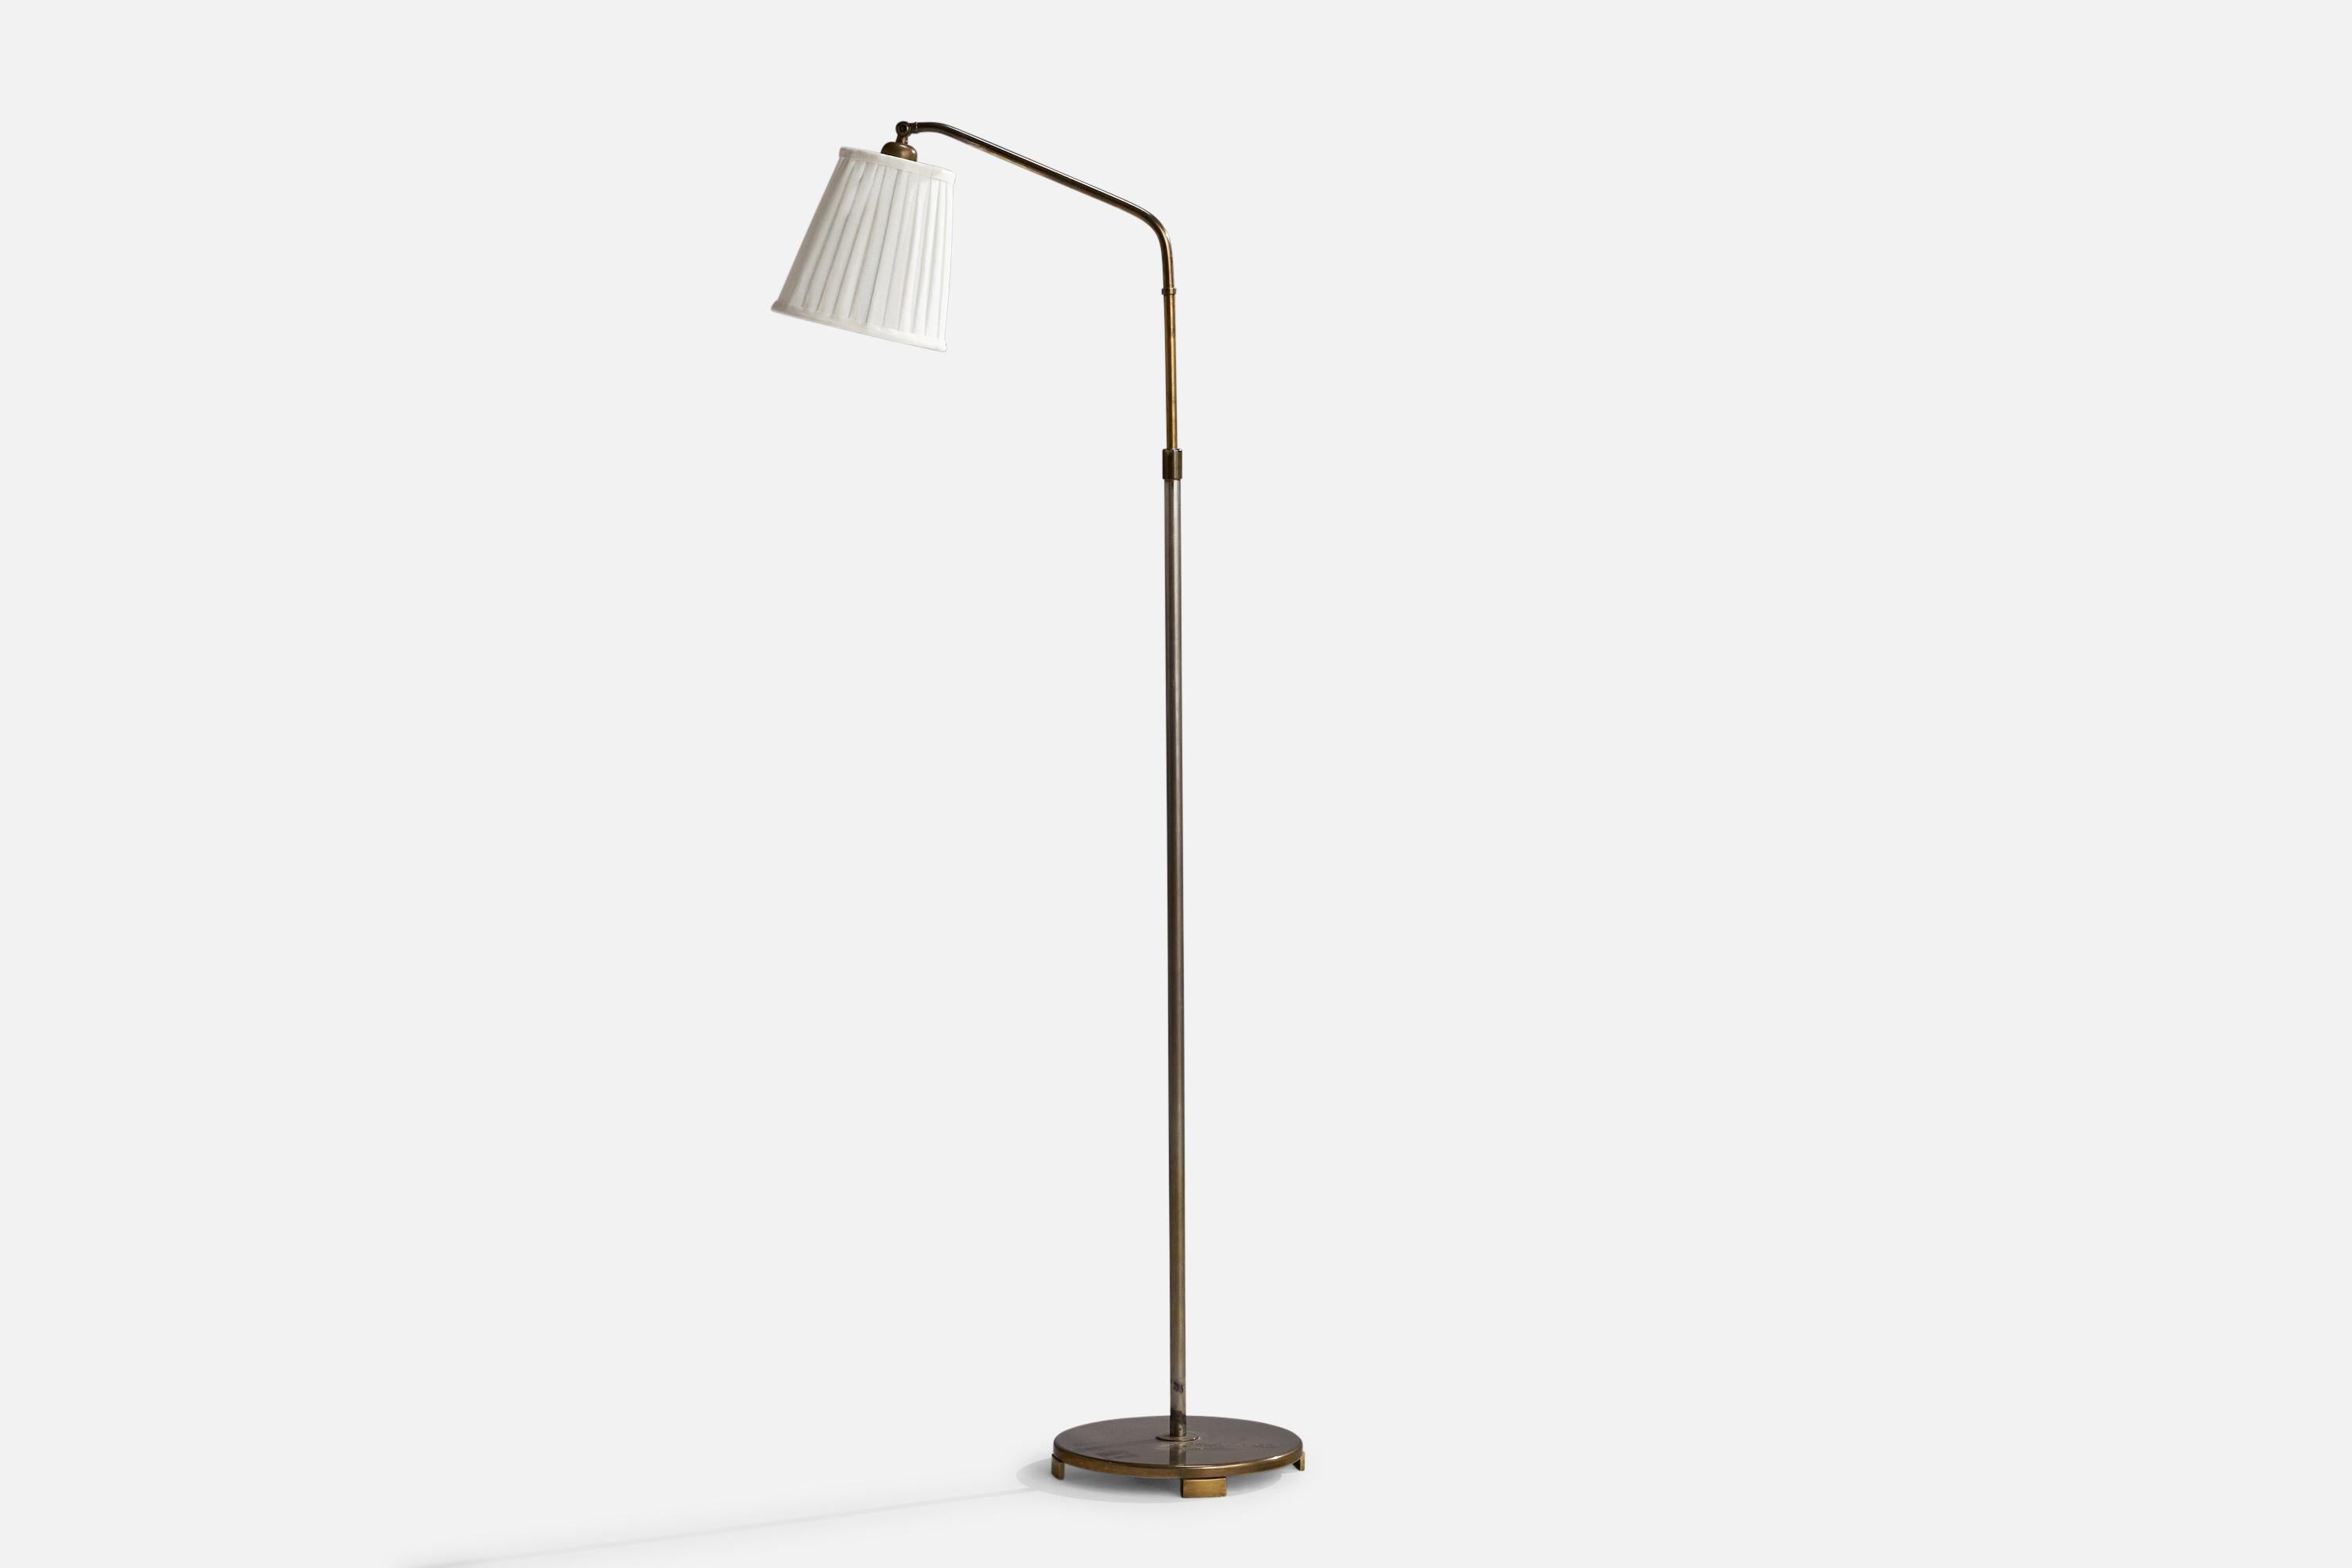 An adjustable brass, metal and off-white fabric floor lamp designed and produced in Sweden, 1940s.

Dimensions will vary depending upon adjustment.
Overall Dimensions (inches): 61” H x 11.25” W x 25”  D
Stated dimensions include shade.
Bulb